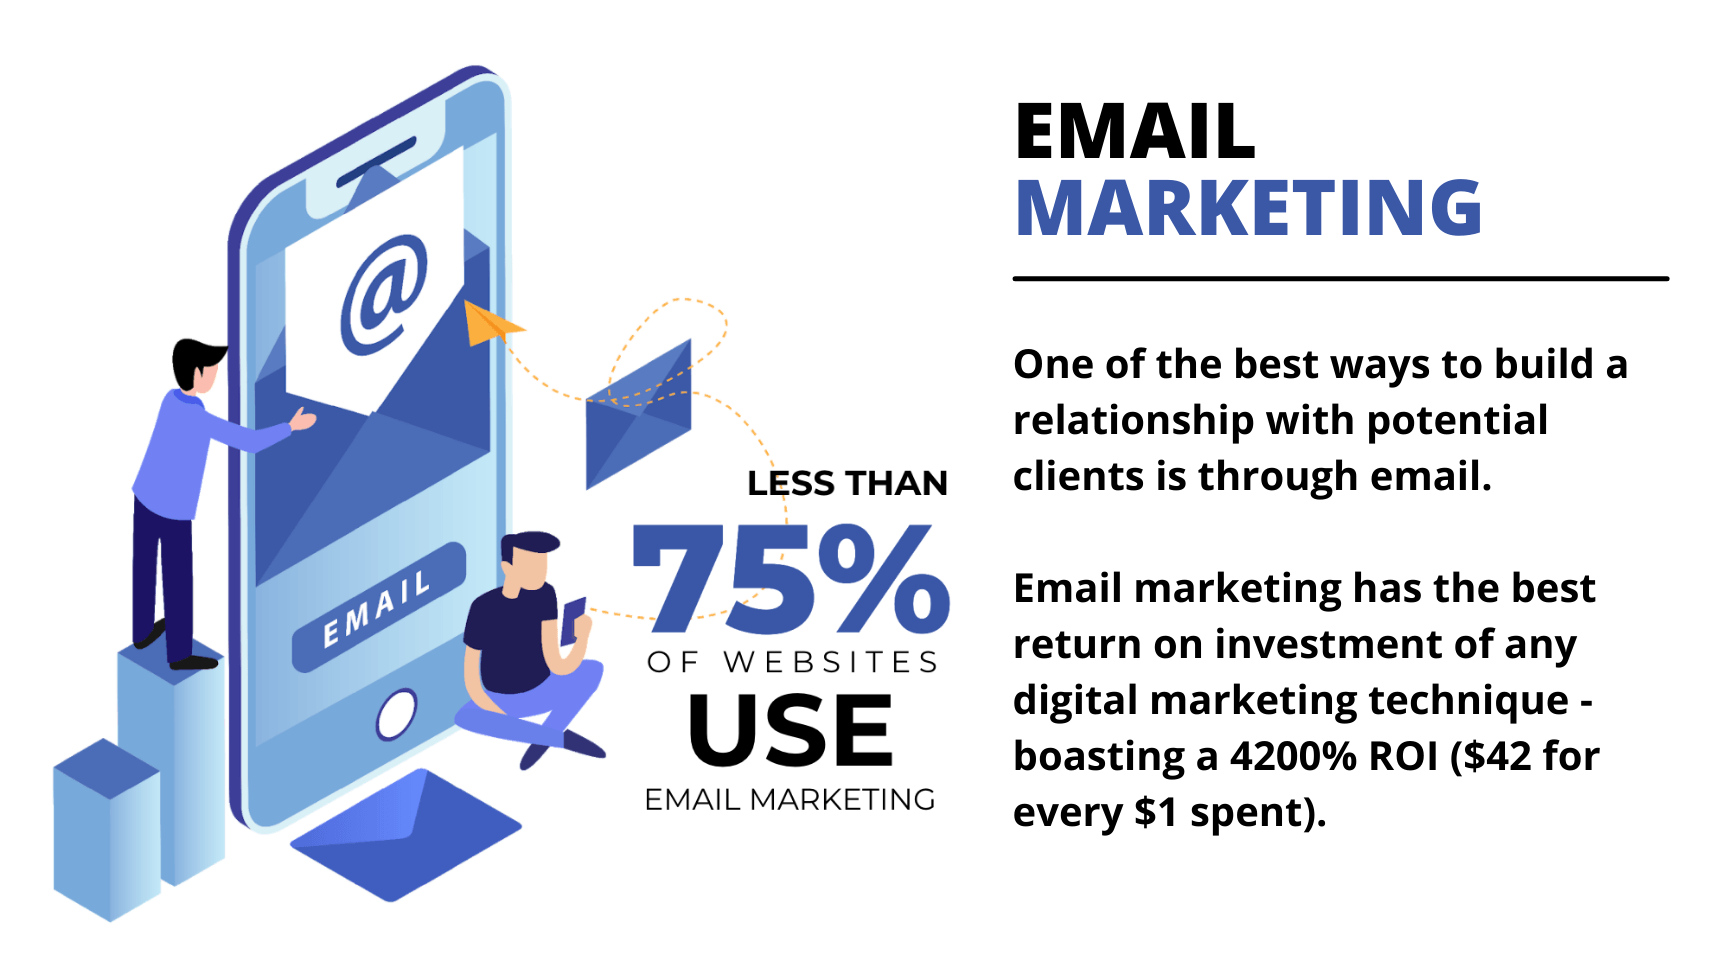 less than 75% of websites use email marketing